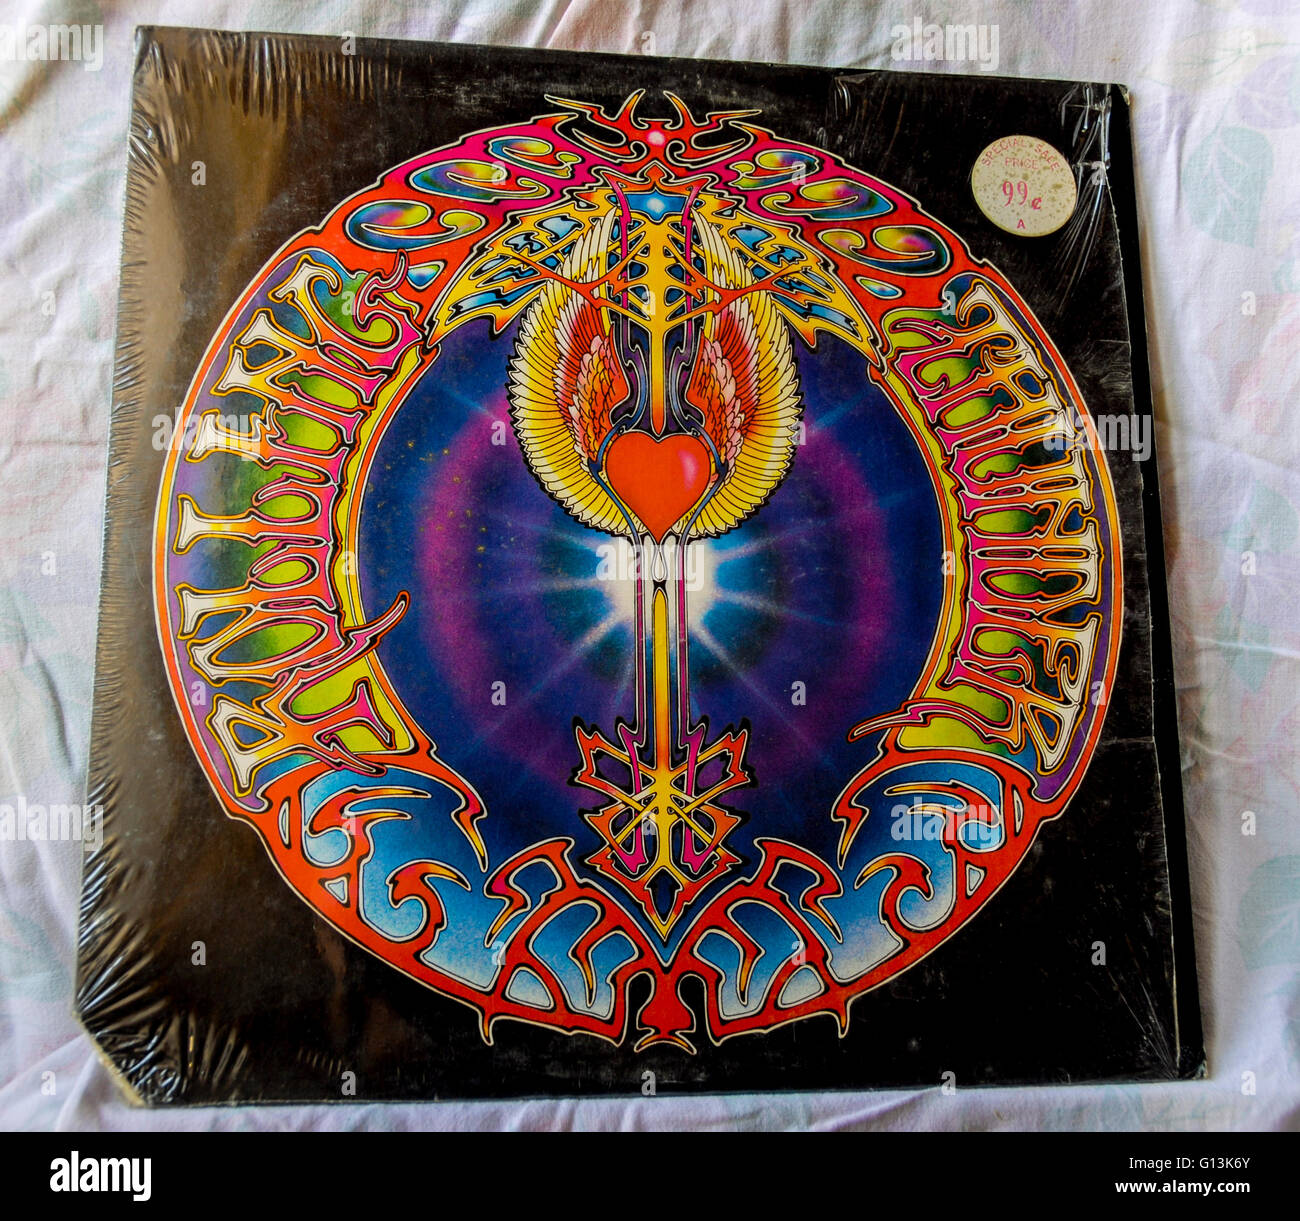 Old record Albums Classical 1960s Rock, The Grateful Dead, Front album Cover, Psychedelic Foto Stock